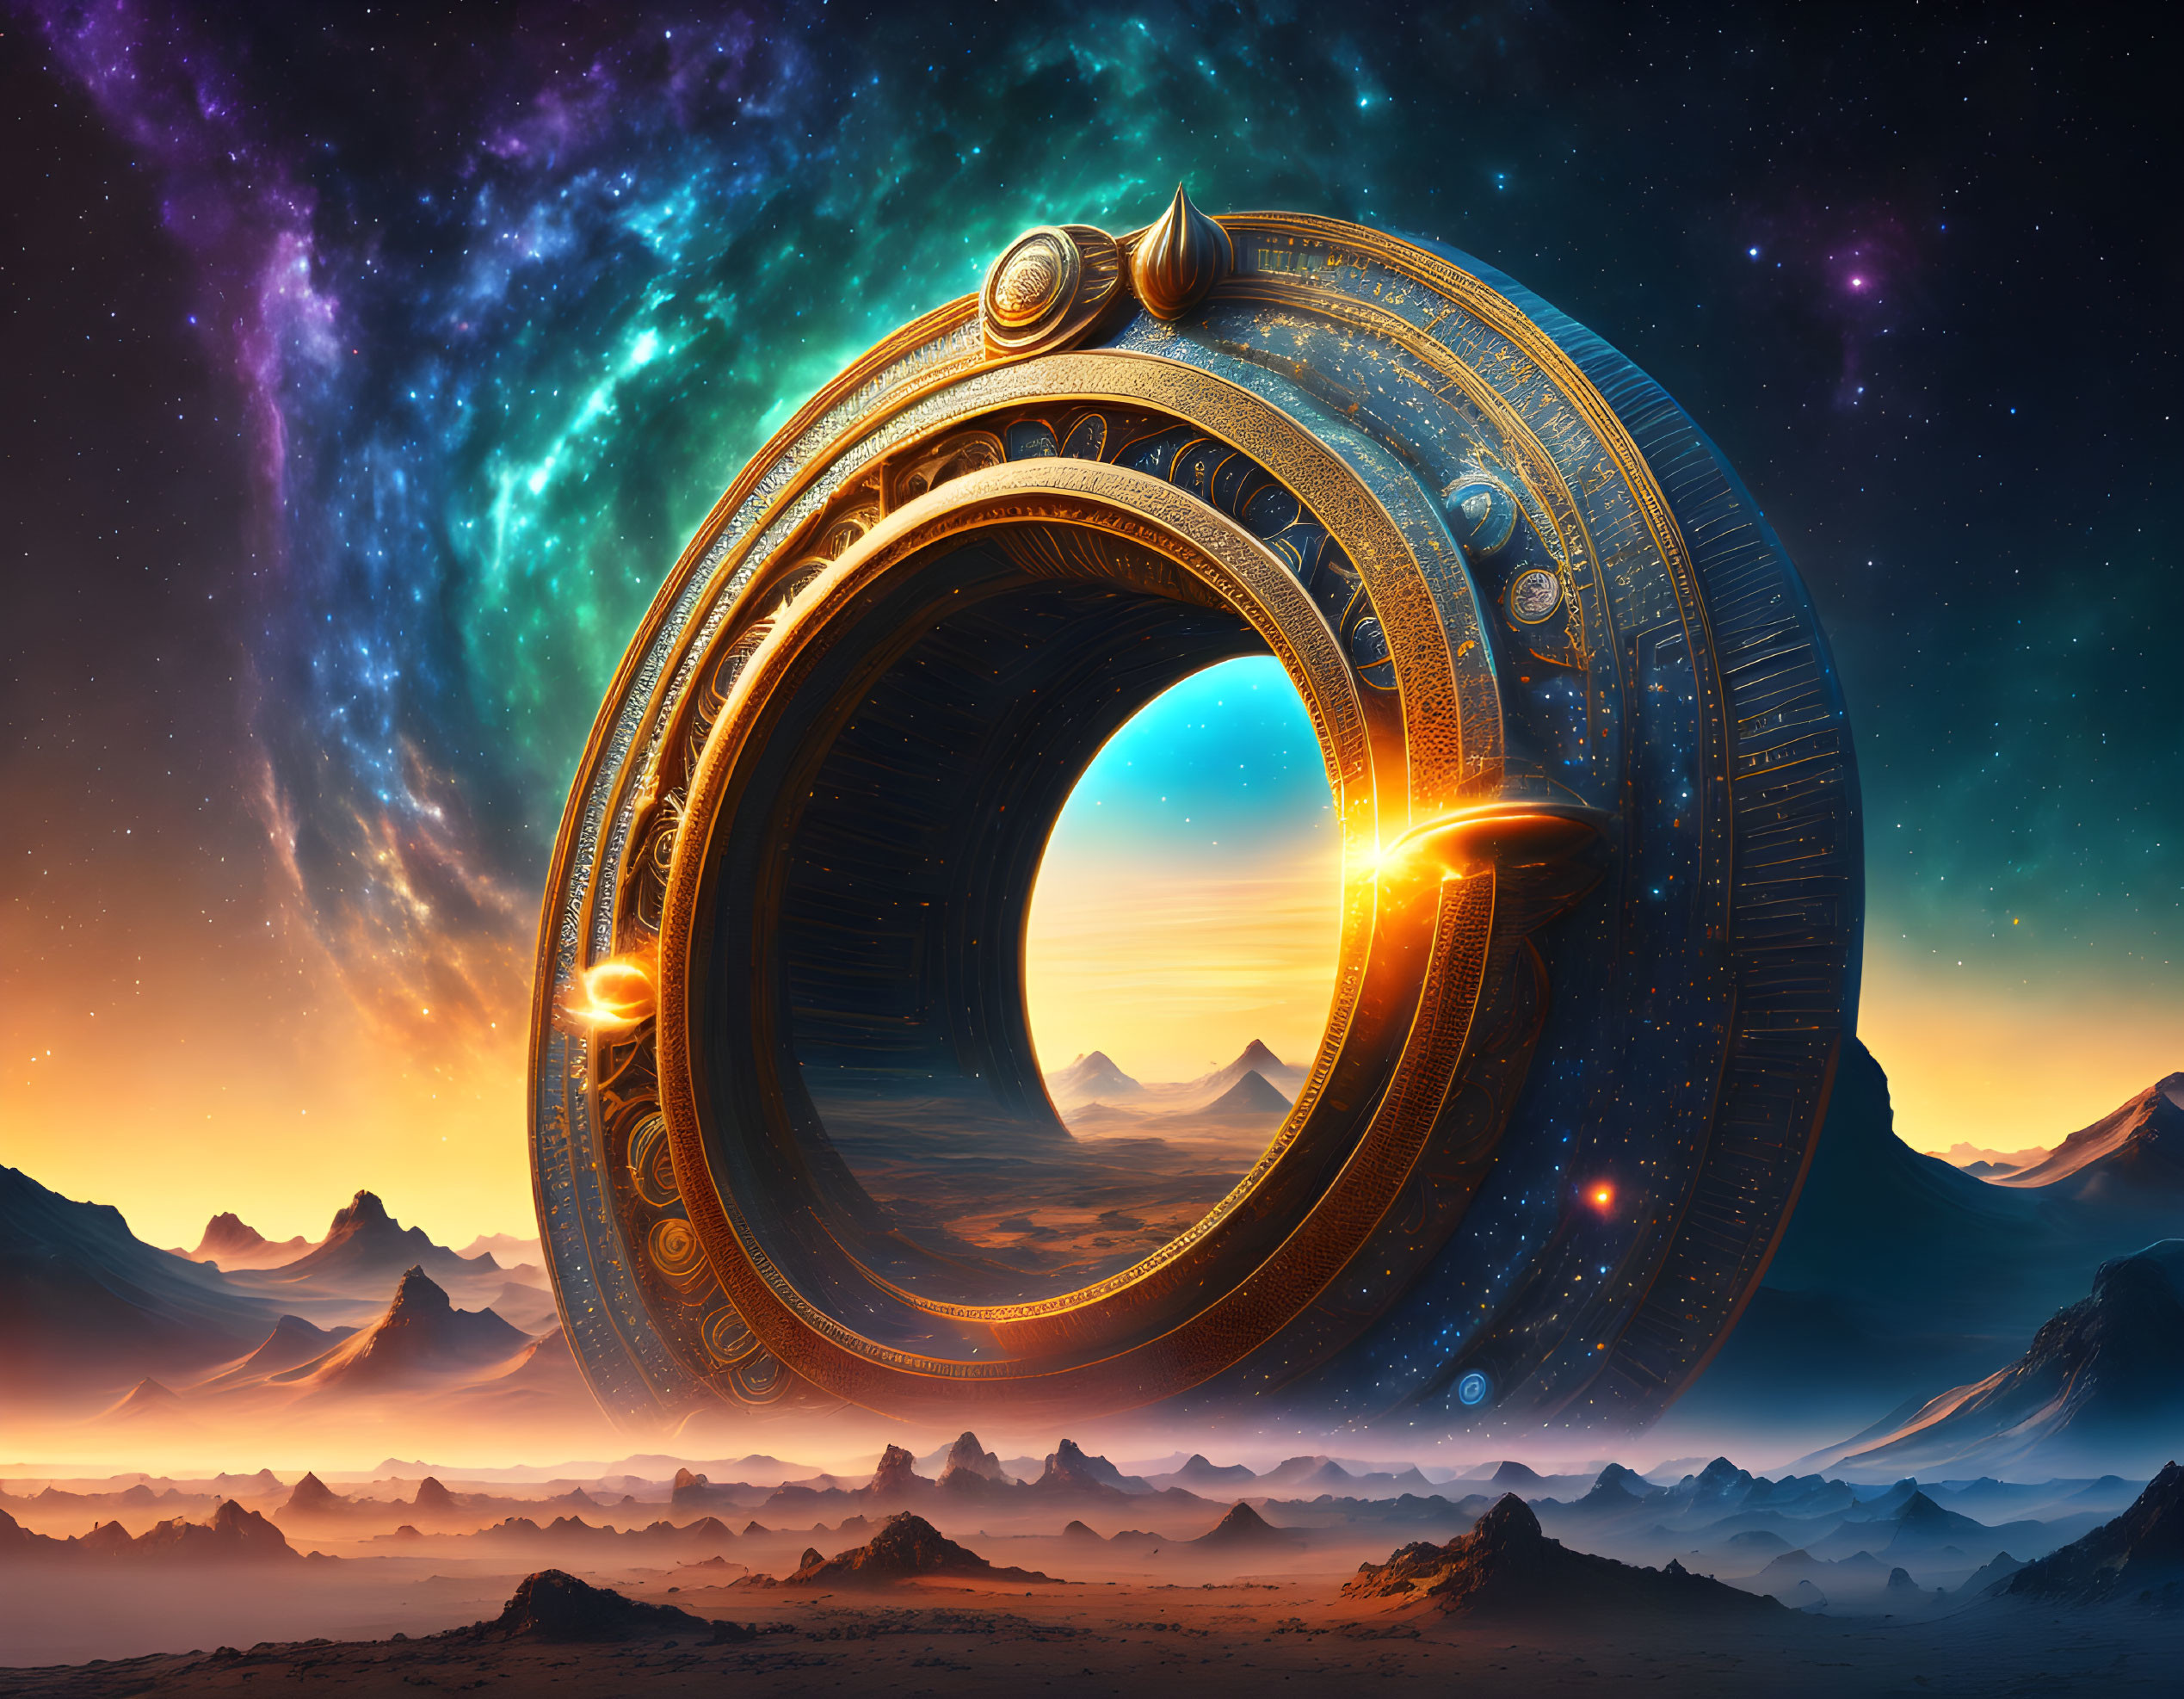 Ancient circular portal with intricate patterns in surreal landscape.